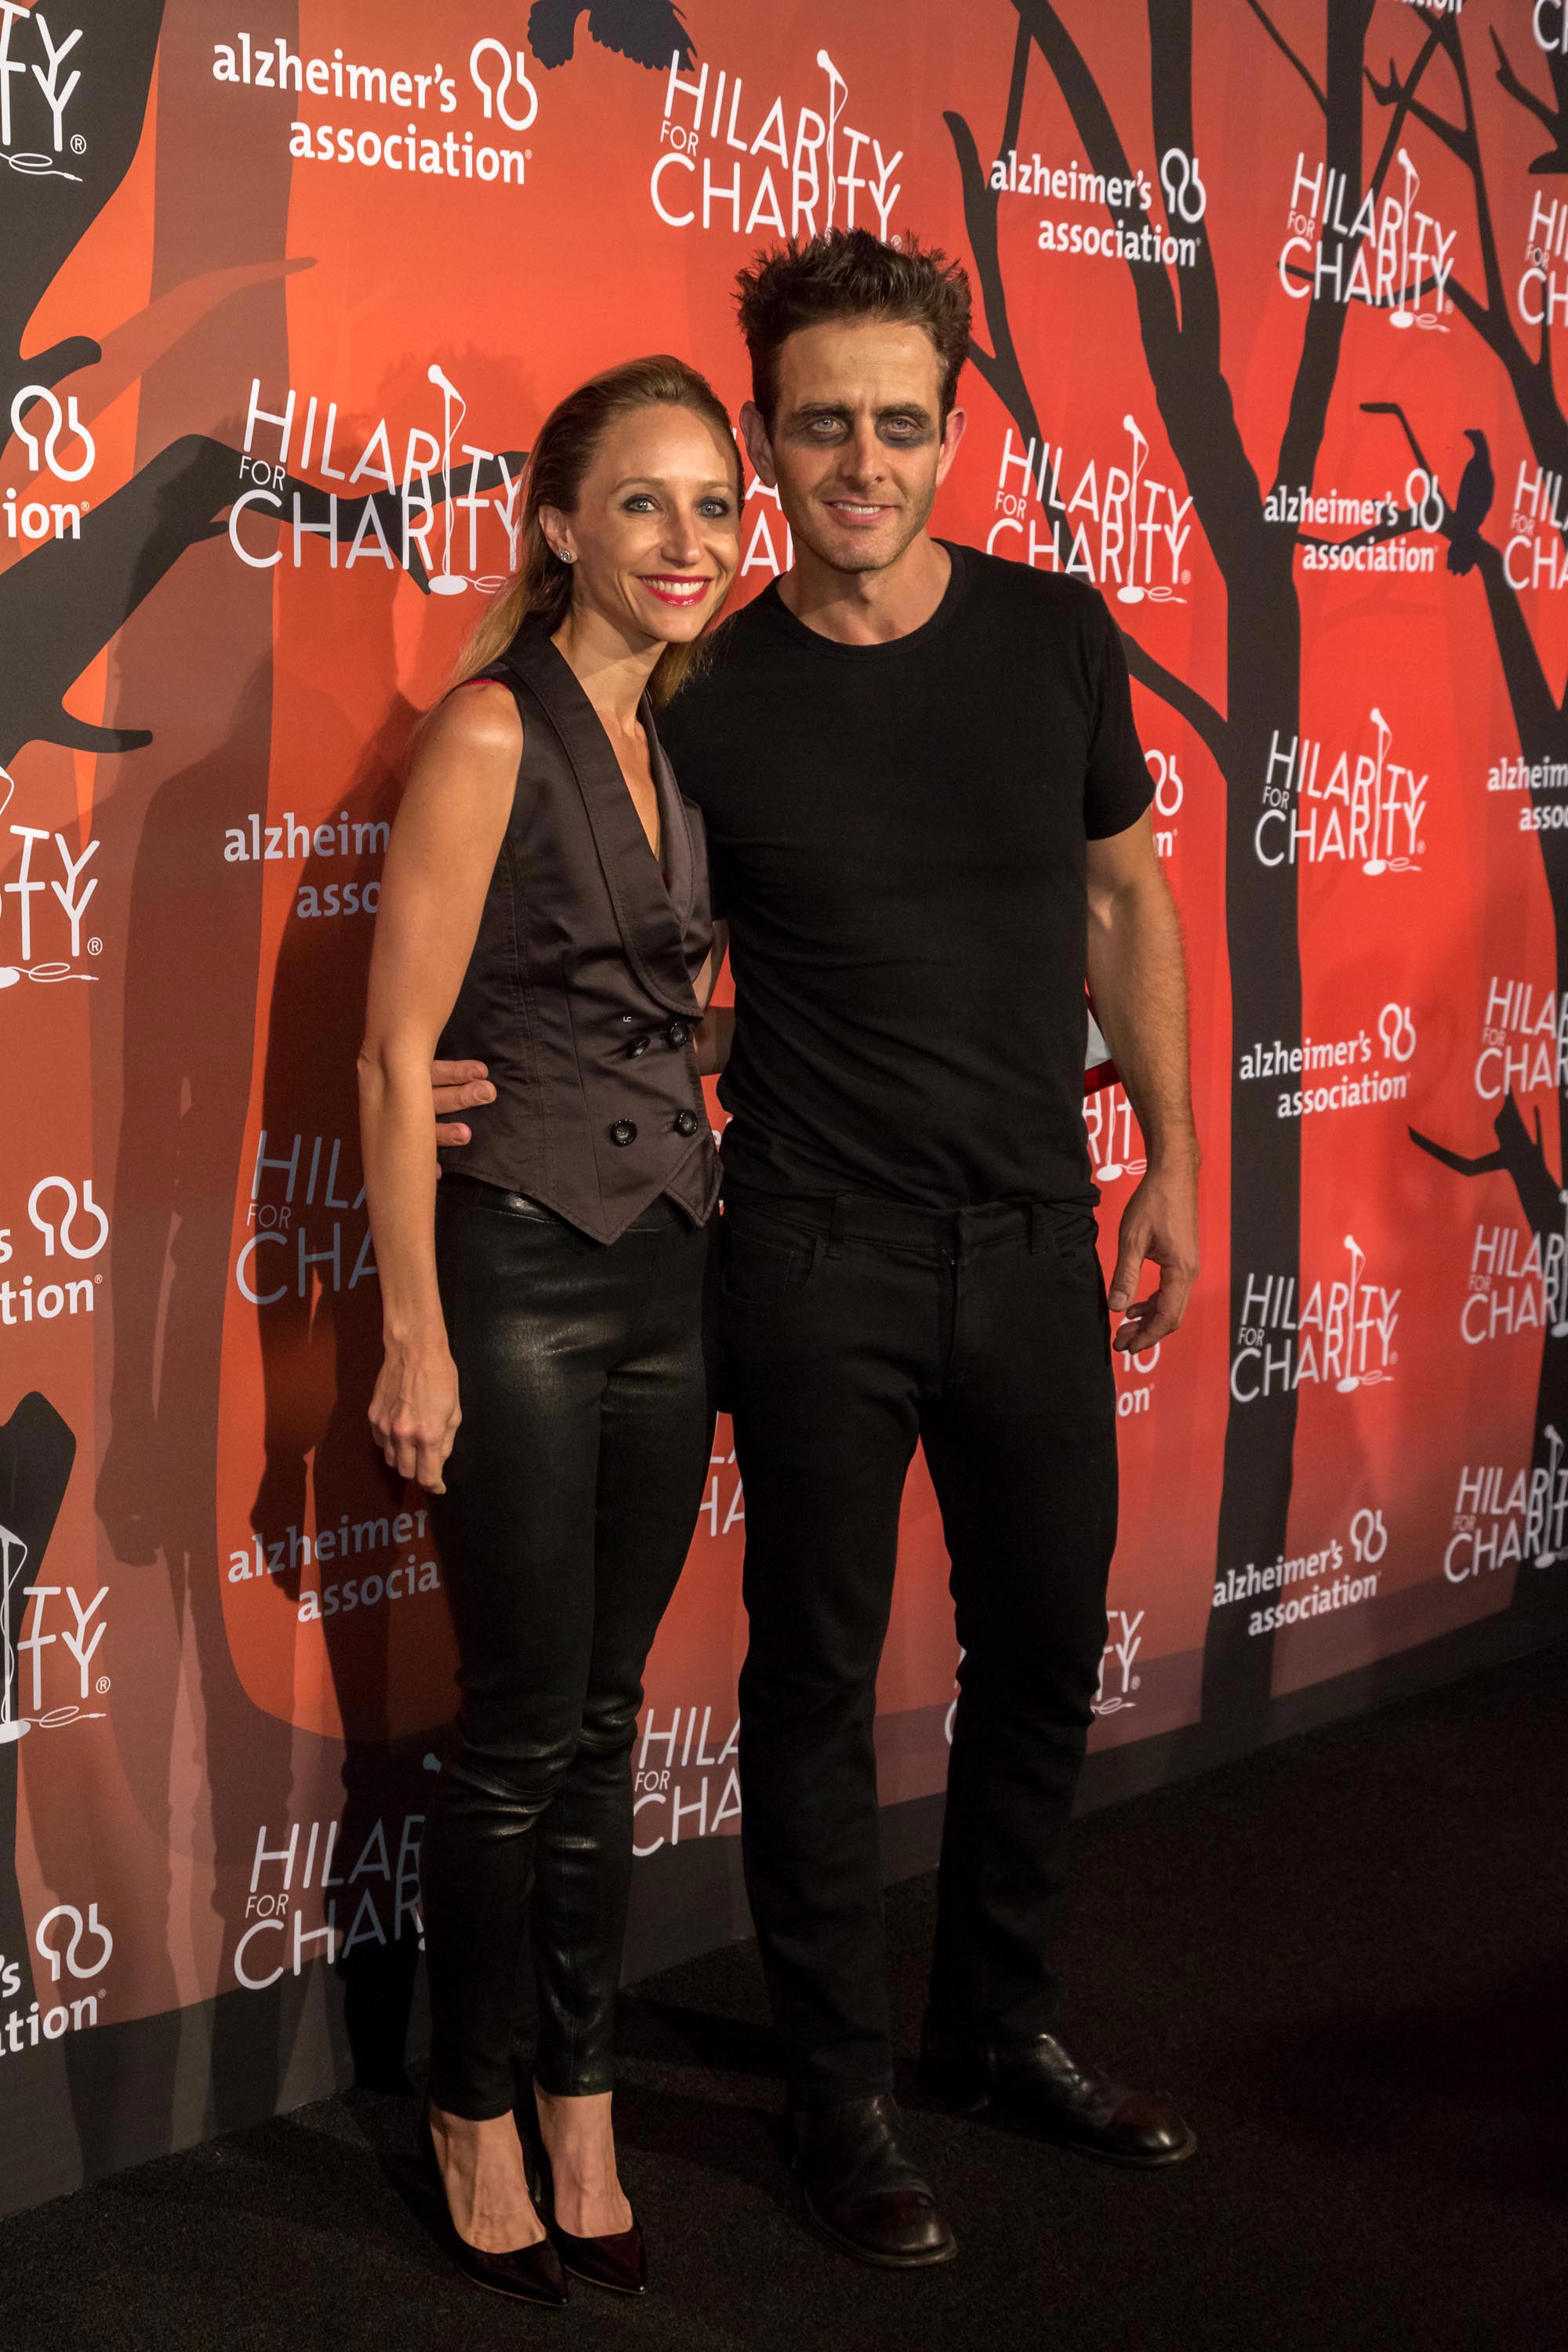 Barrett Williams attends Hilarity for Charity’s 5th Annual Los Angeles Variety Show